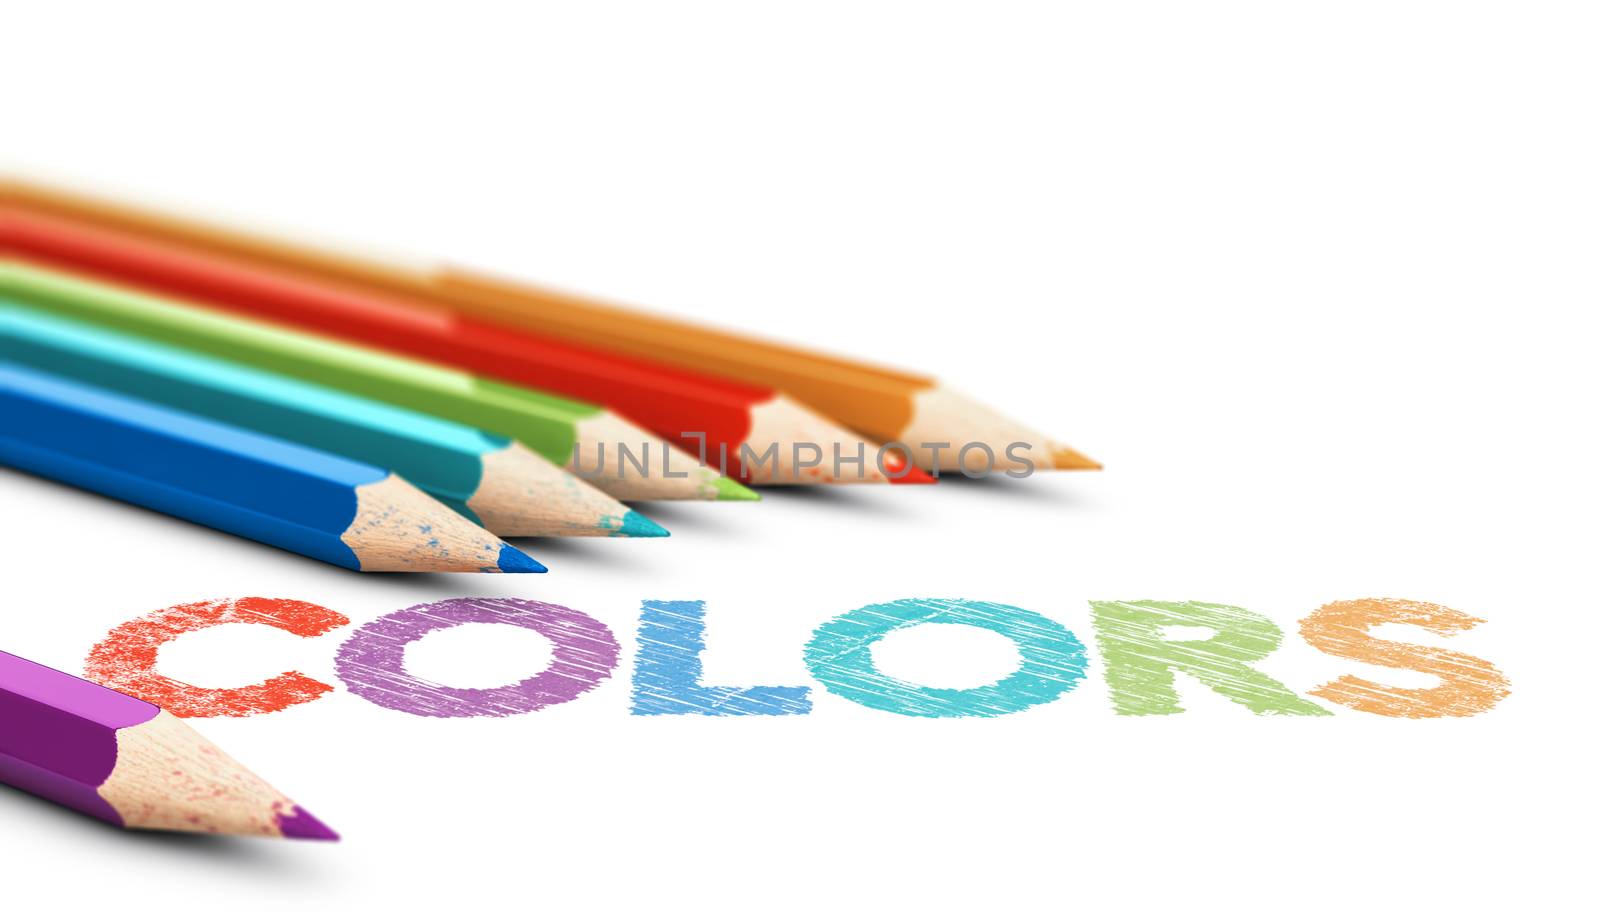 3D illustration of six wooden color pencils with the word colors over white background